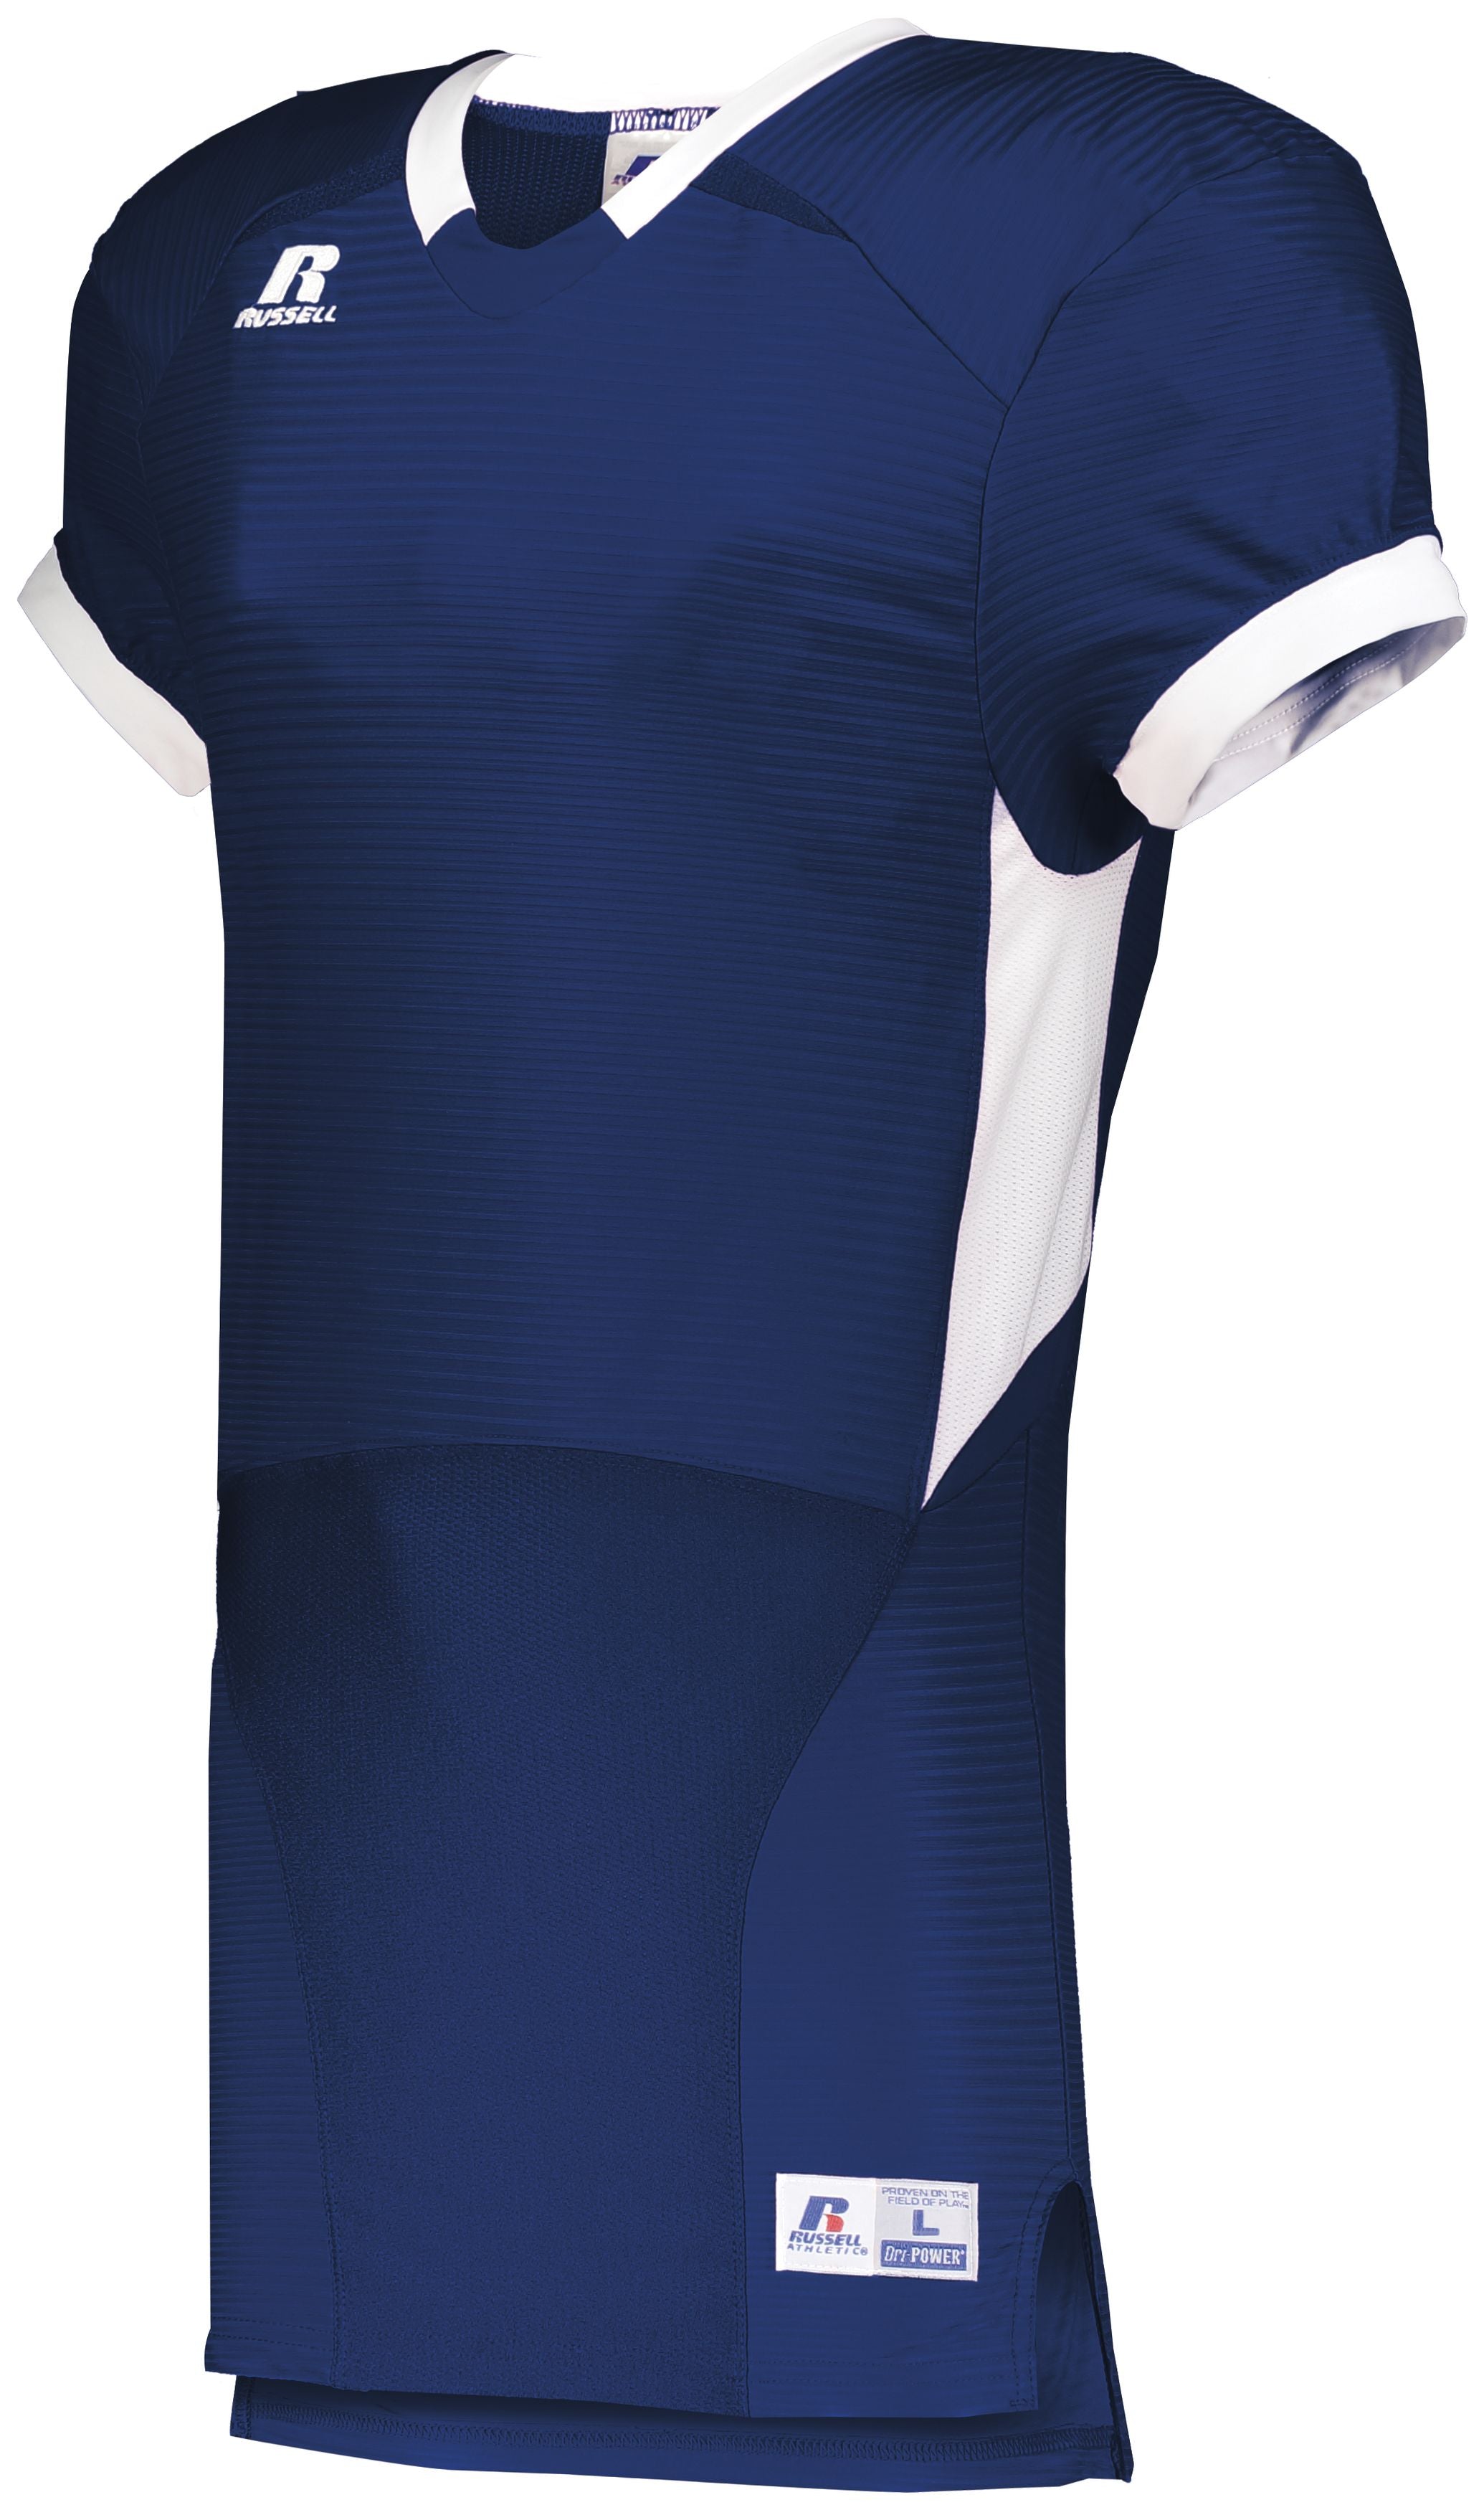 Russell Athletic Color Block Game Jersey in Navy/White  -Part of the Adult, Adult-Jersey, Football, Russell-Athletic-Products, Shirts, All-Sports, All-Sports-1 product lines at KanaleyCreations.com